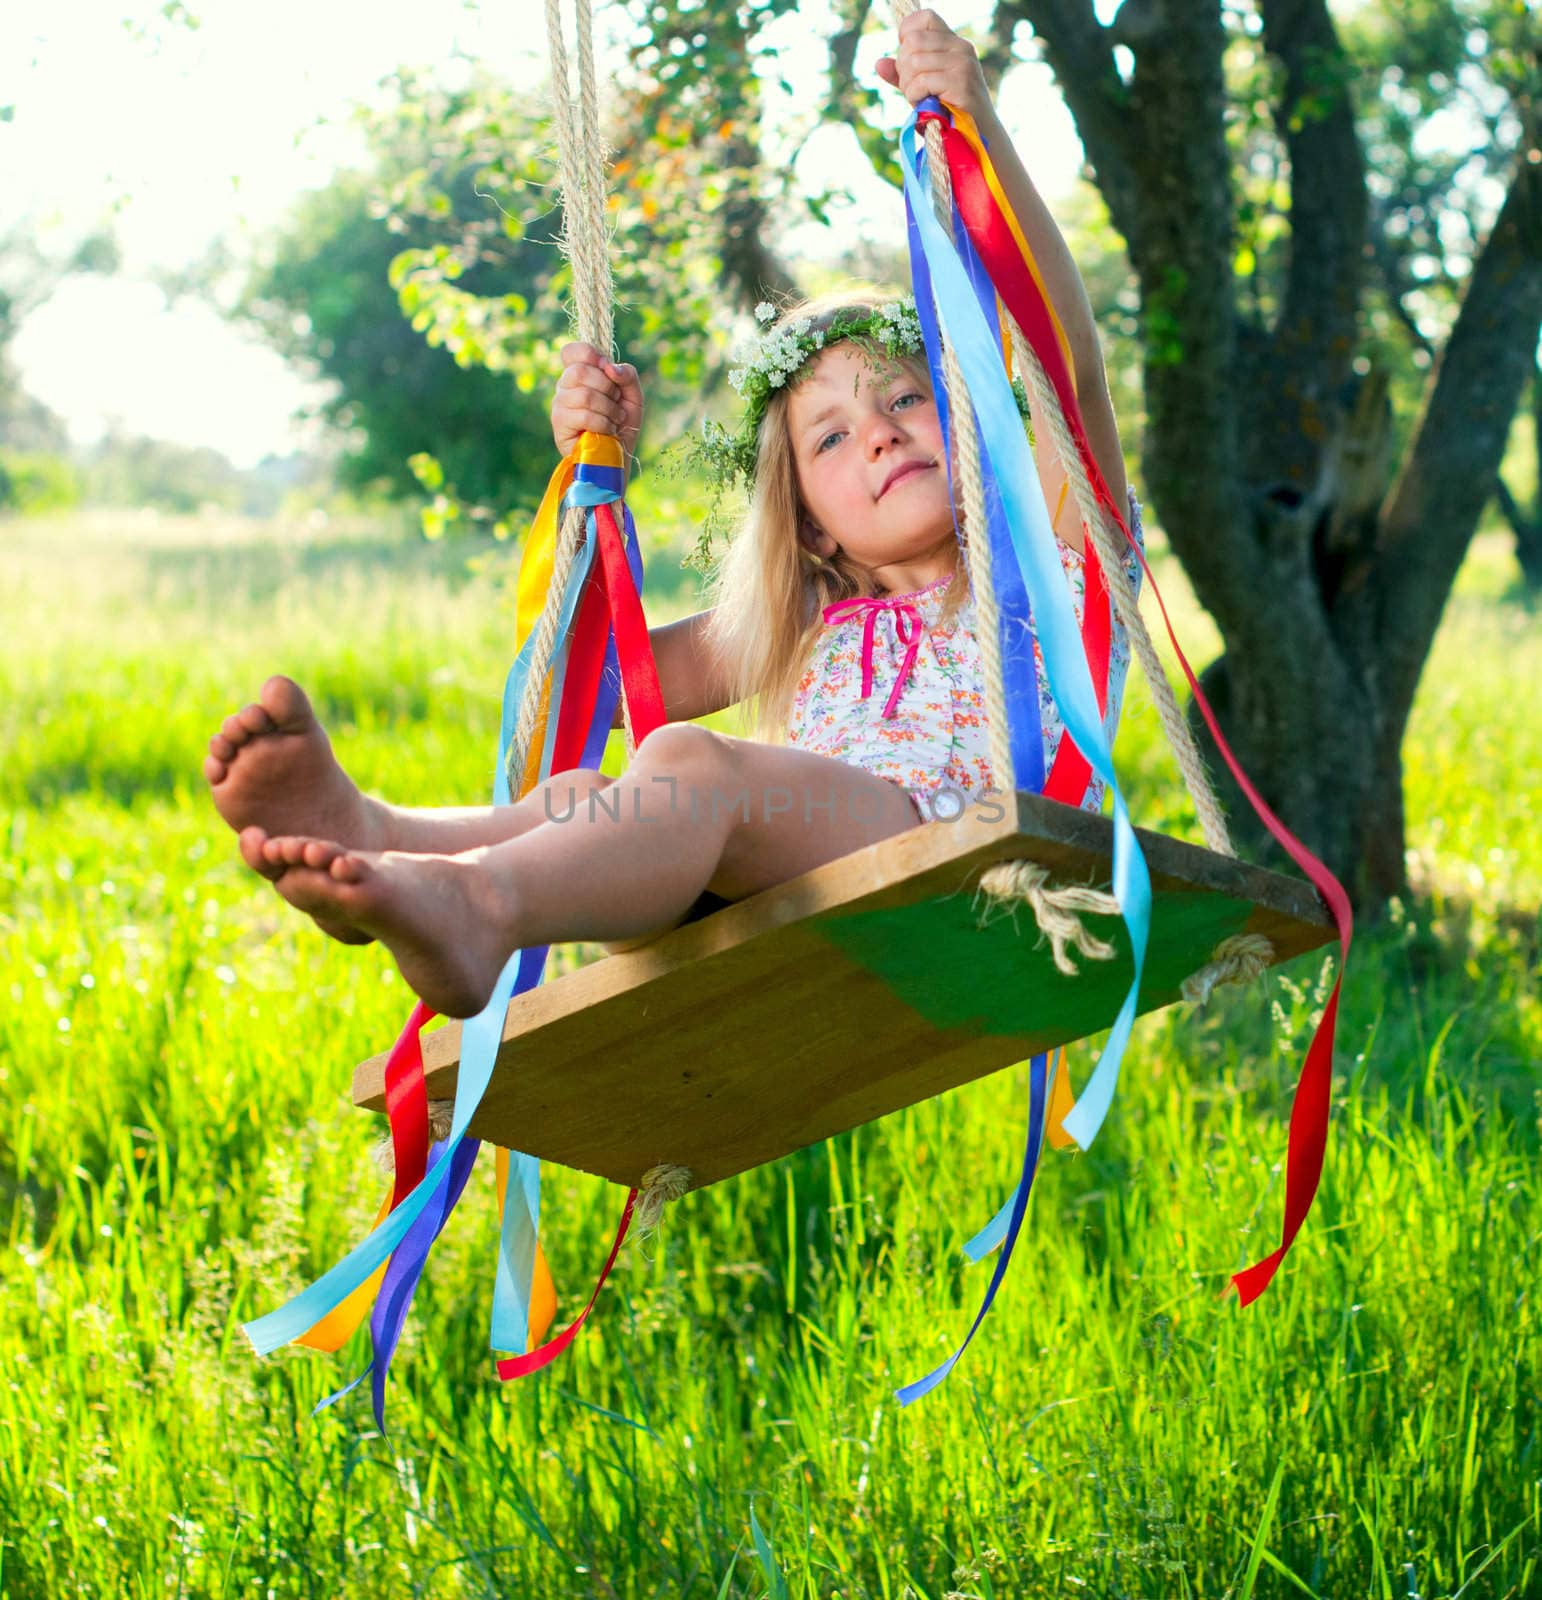 Young cute girl on swing with ribbons in the garden